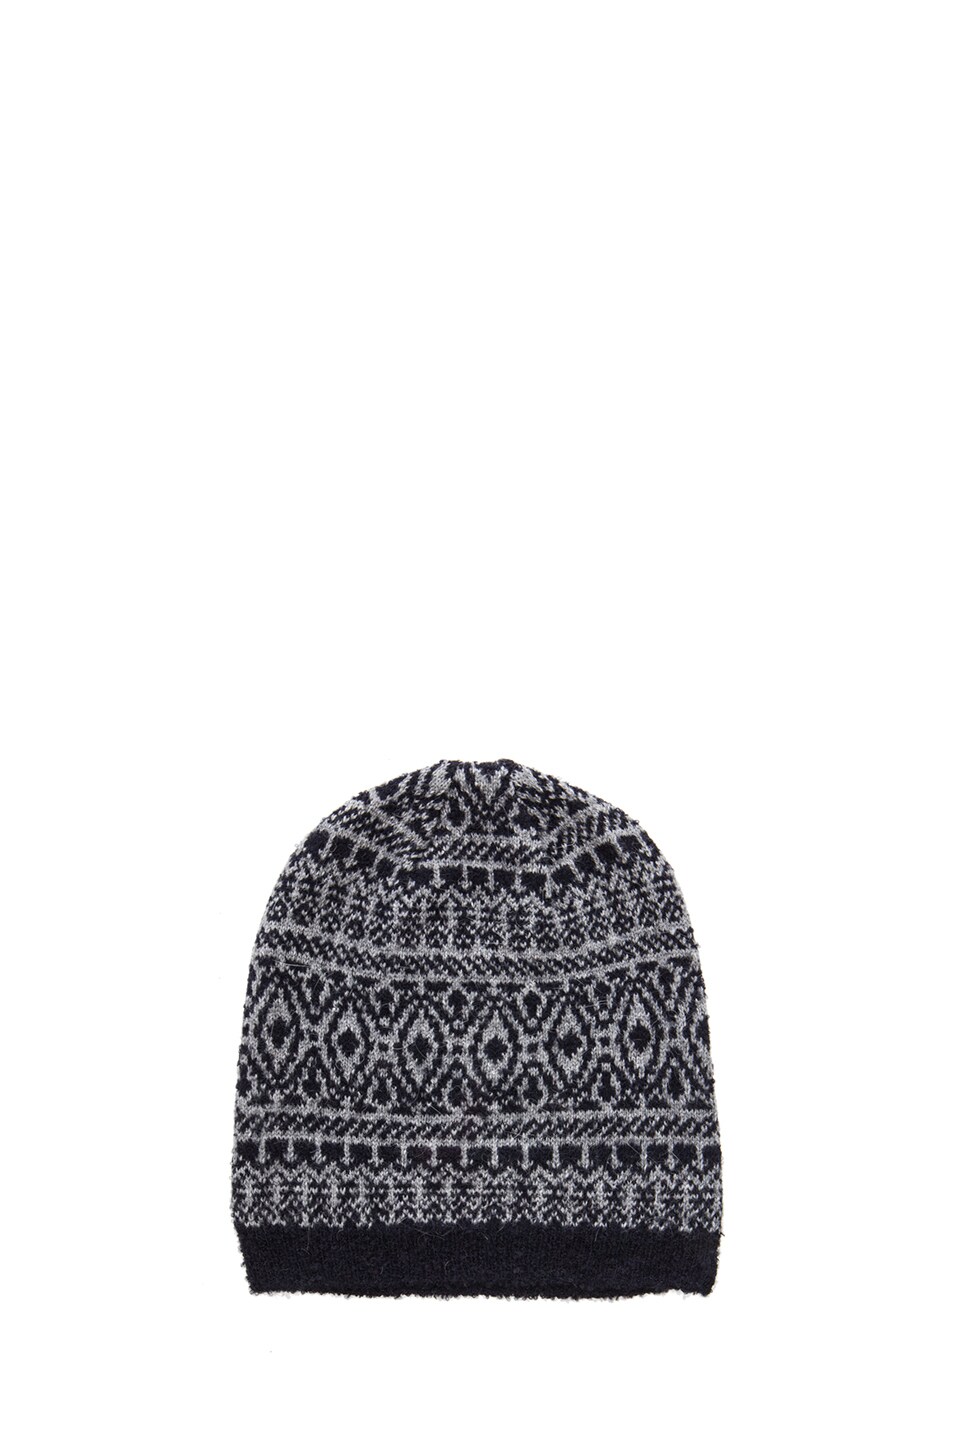 Image 1 of White Mountaineering Beanie in Navy